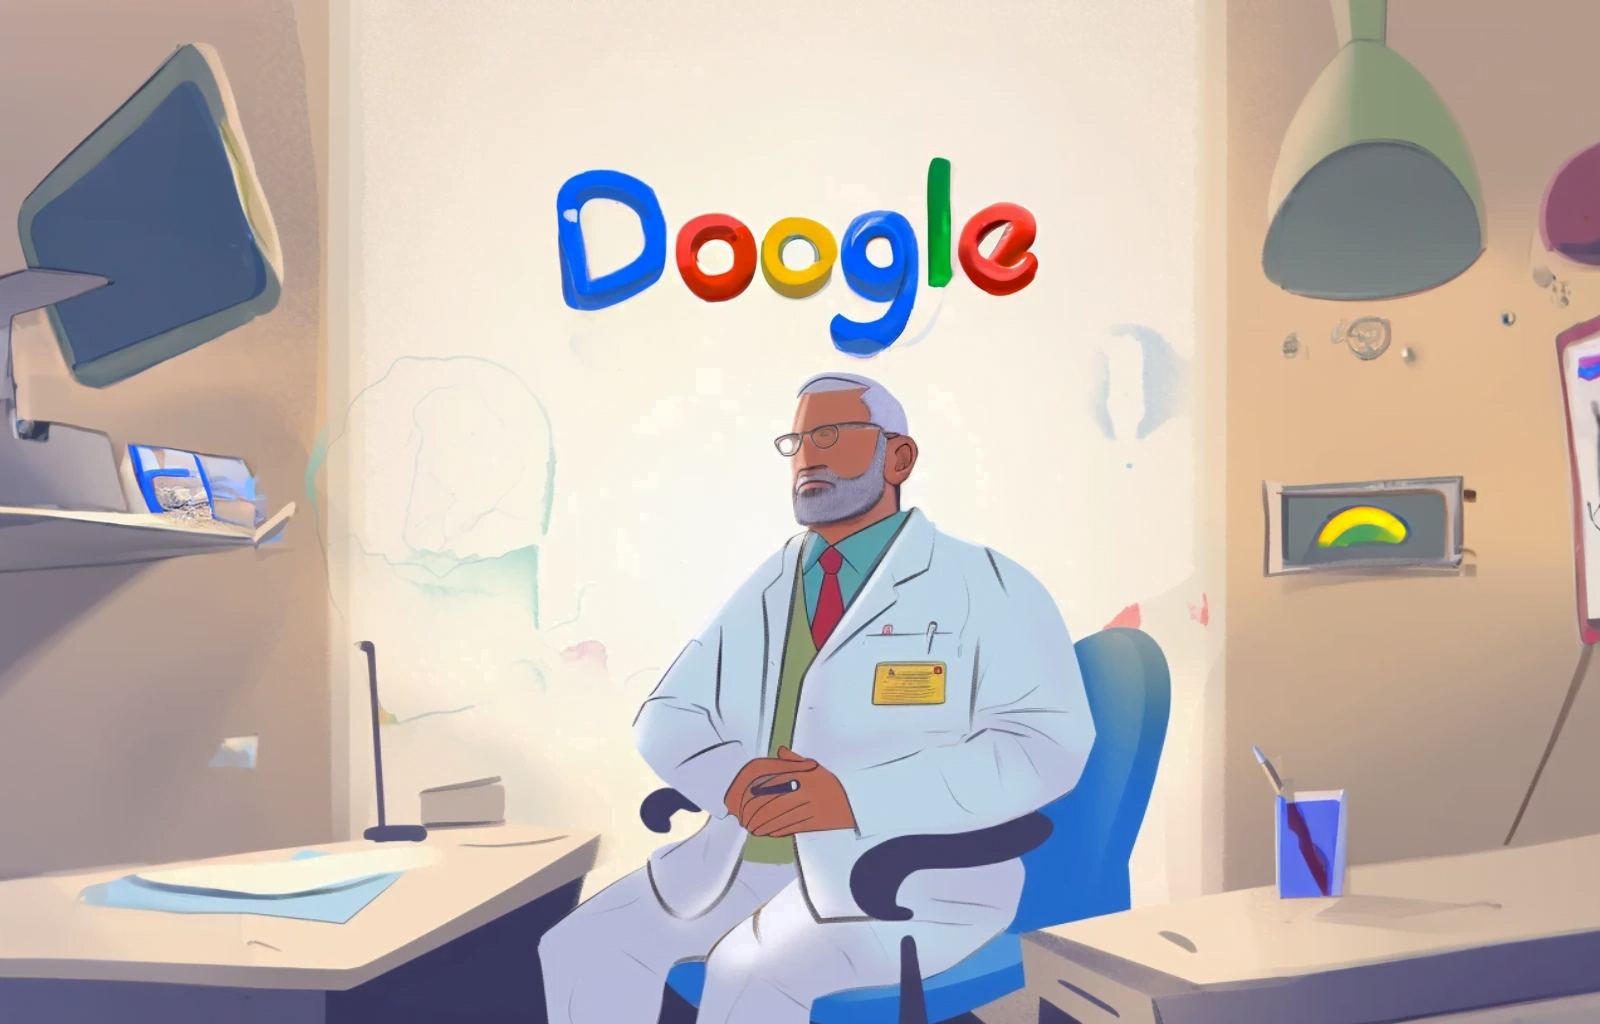 Google’s medical language model “Med-PaLM 2” enters pilot phase with first customers